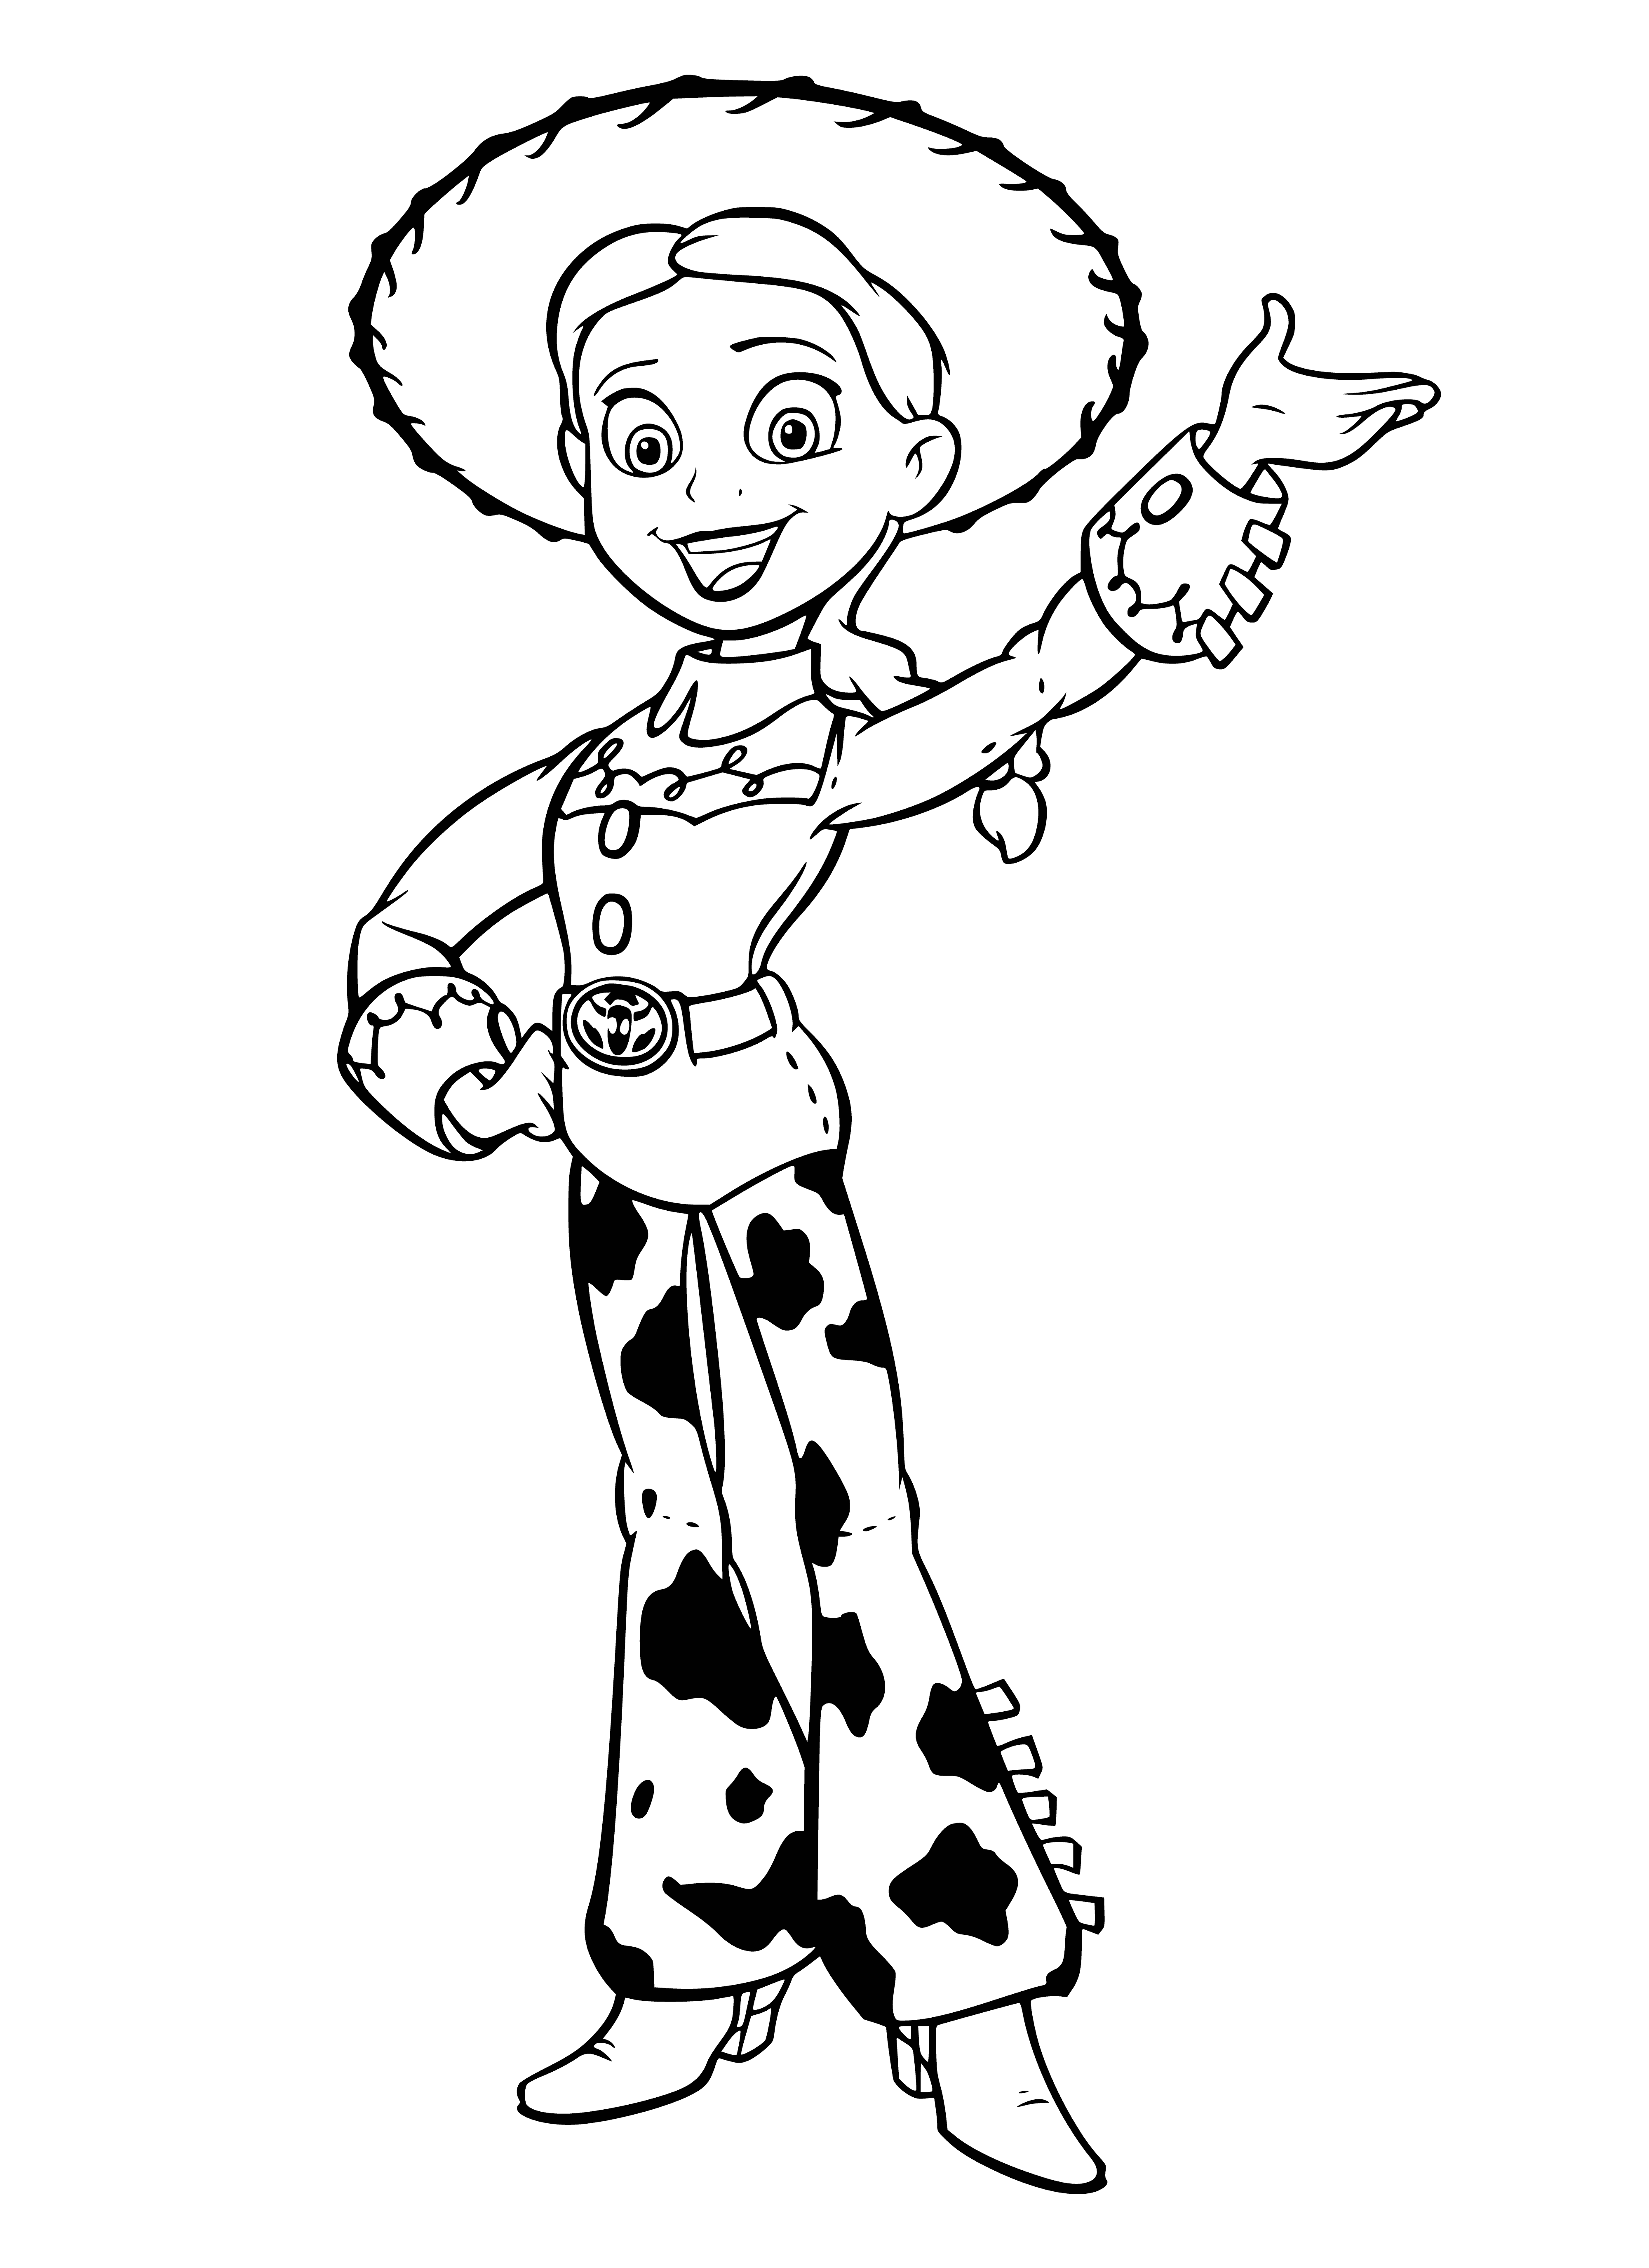 coloring page: Girl wearing cowgirl hat & clothes stands in front of barn with lasso, ready to rope! #cowgirl #adventure #coloringpage